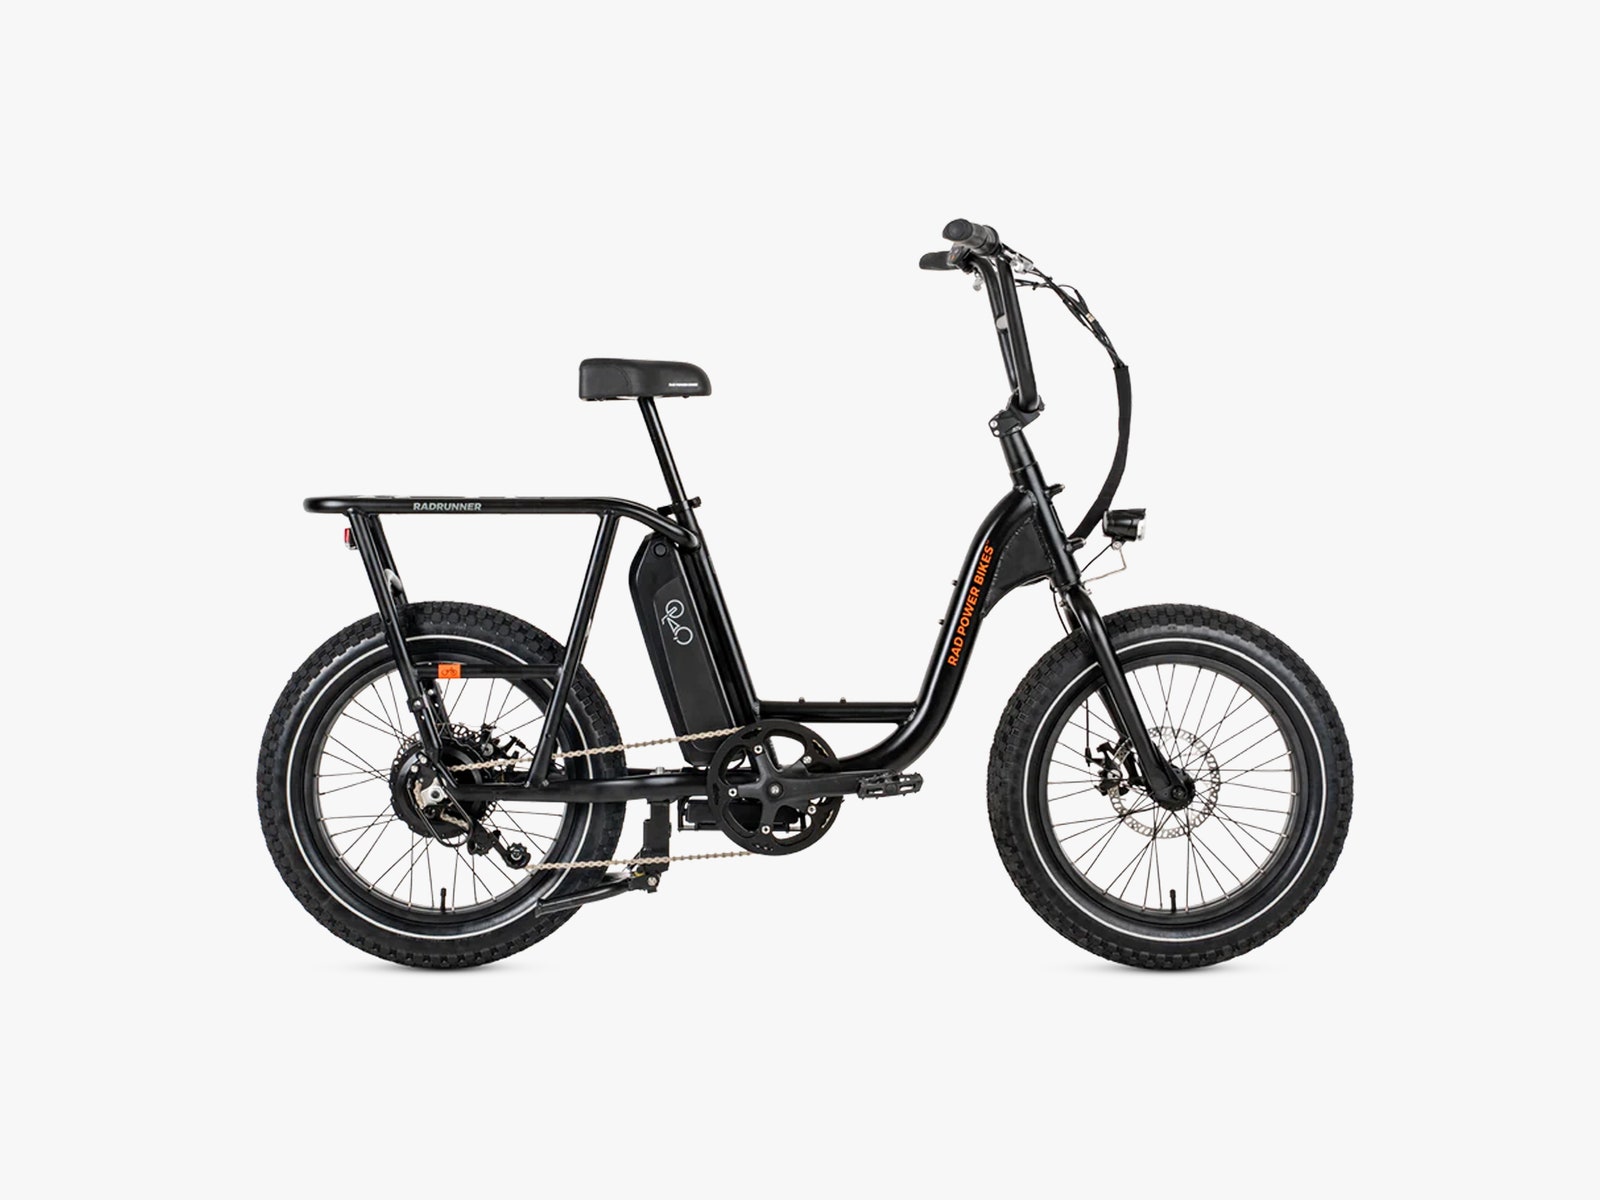 Black electric bicycle side view